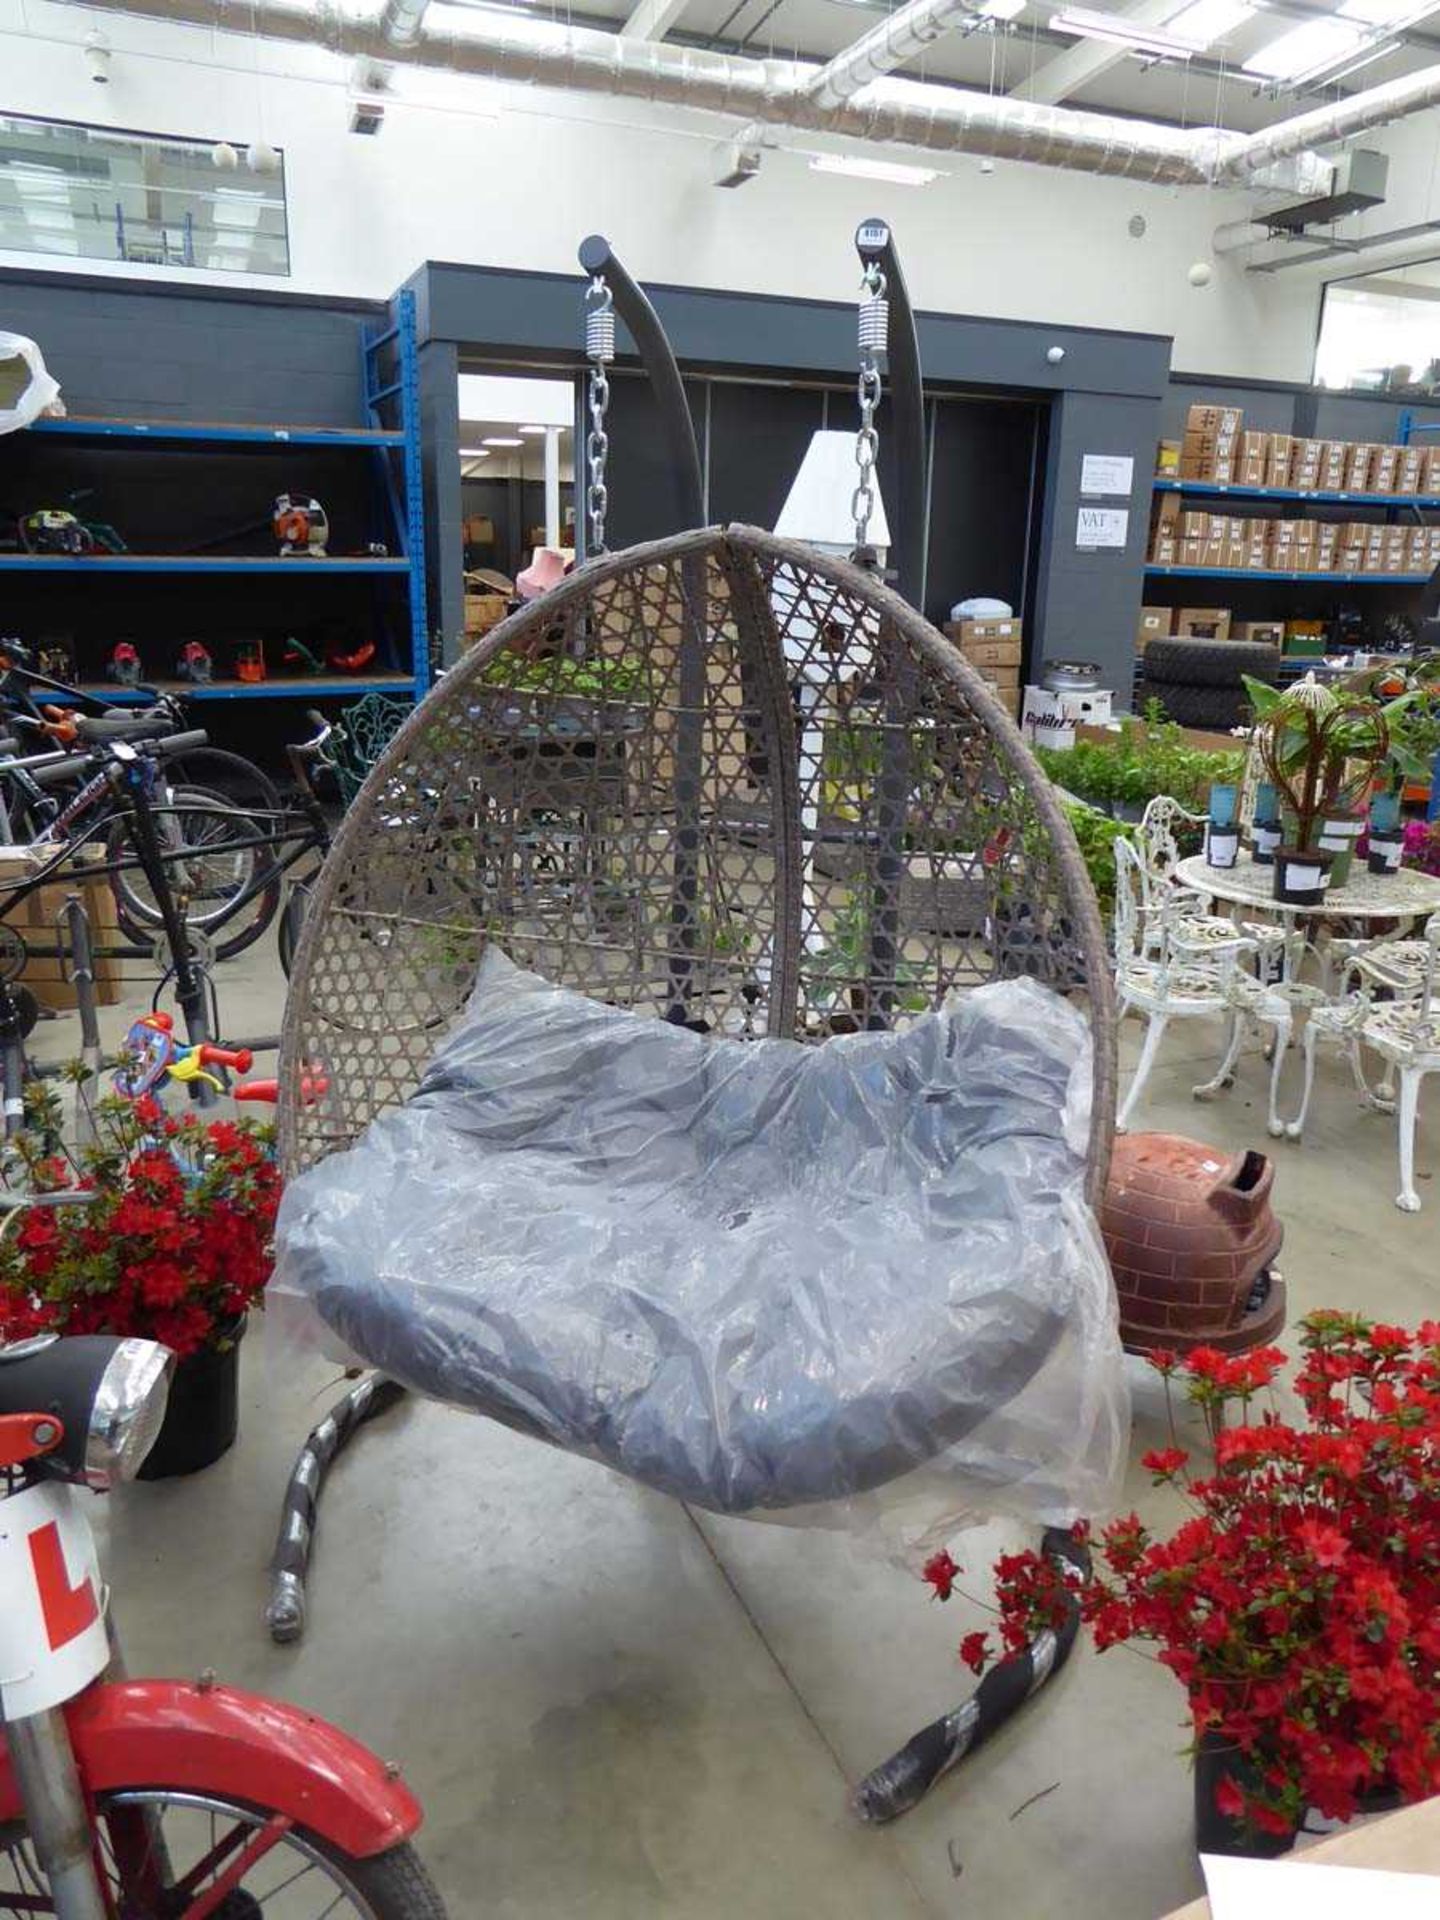 Double egg hanging chair